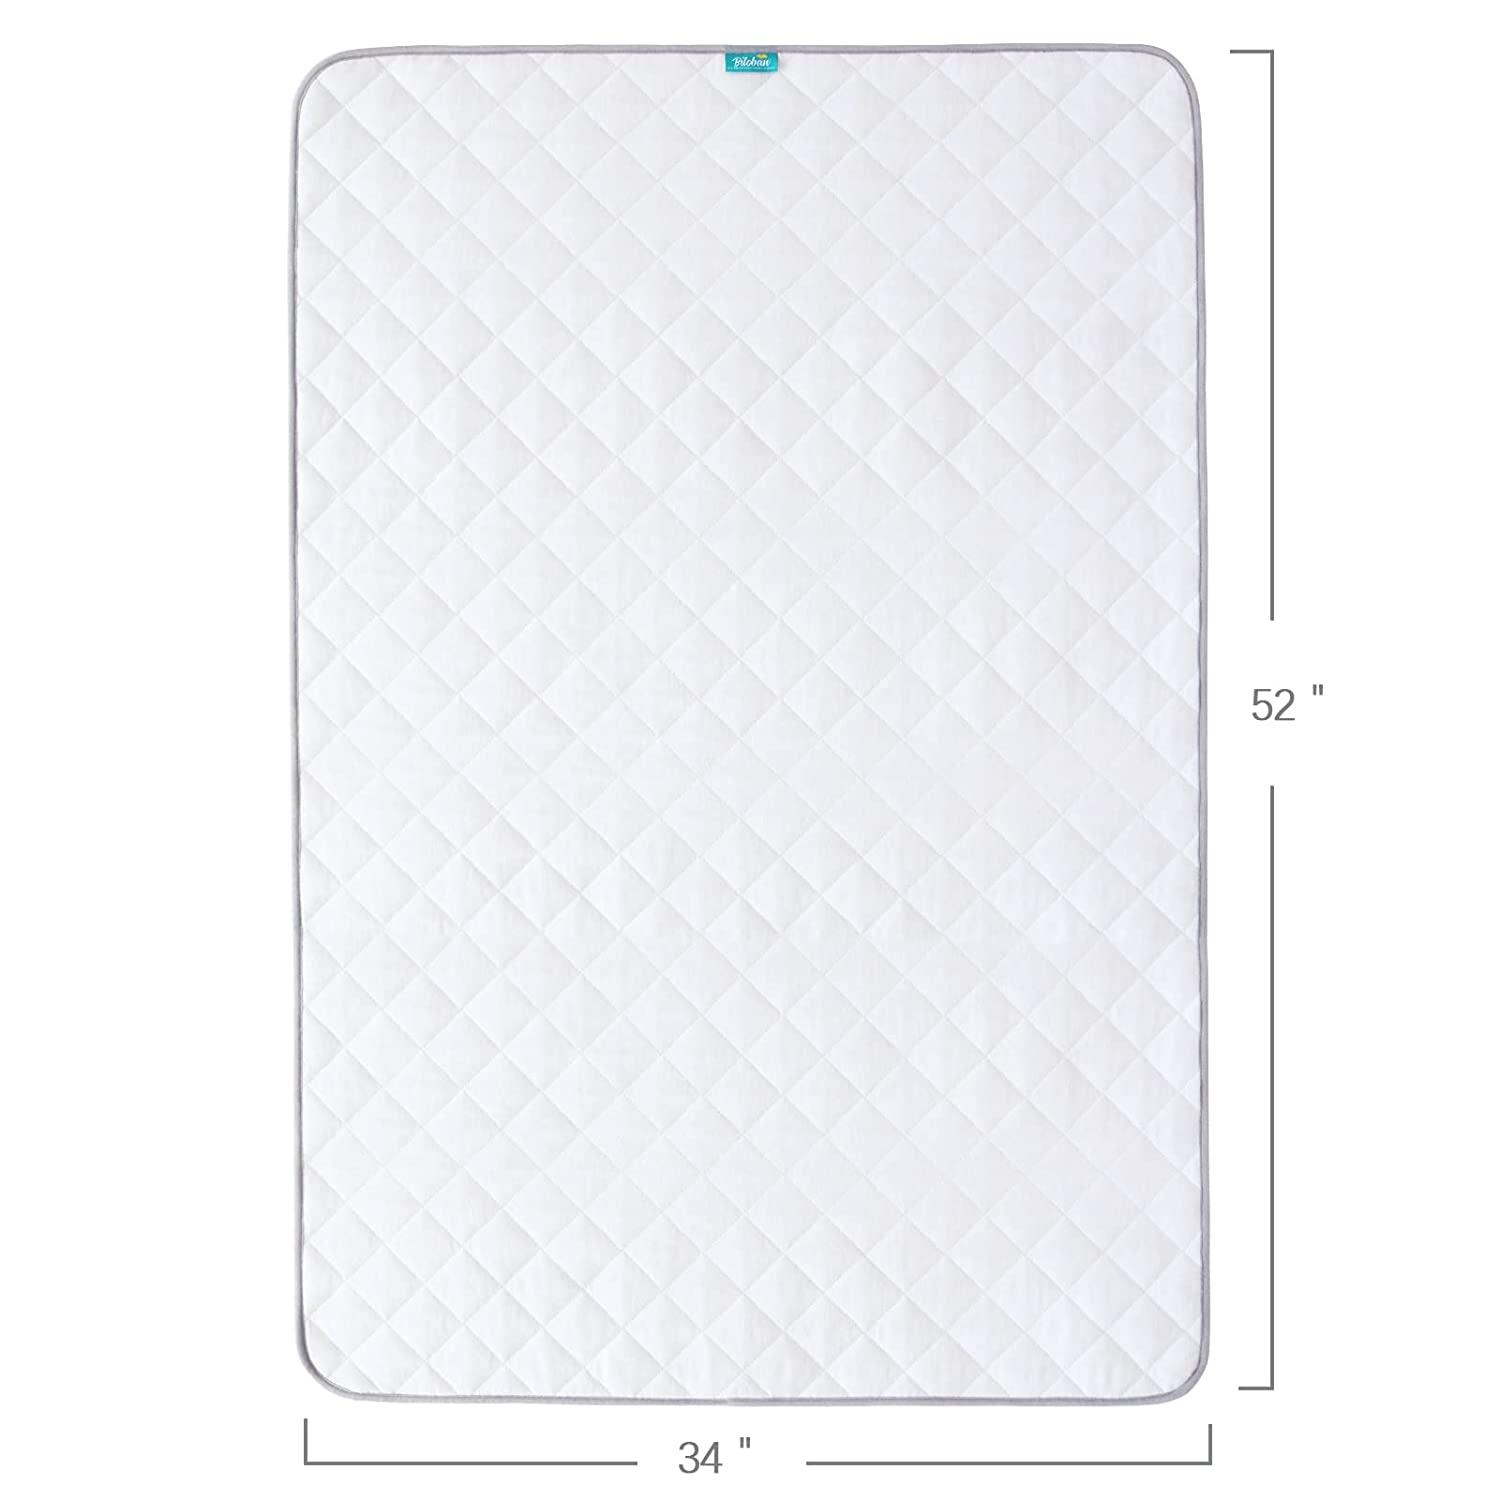  Hospital Bed Pads 34'' x 76'', Non-Slip Washable Pee